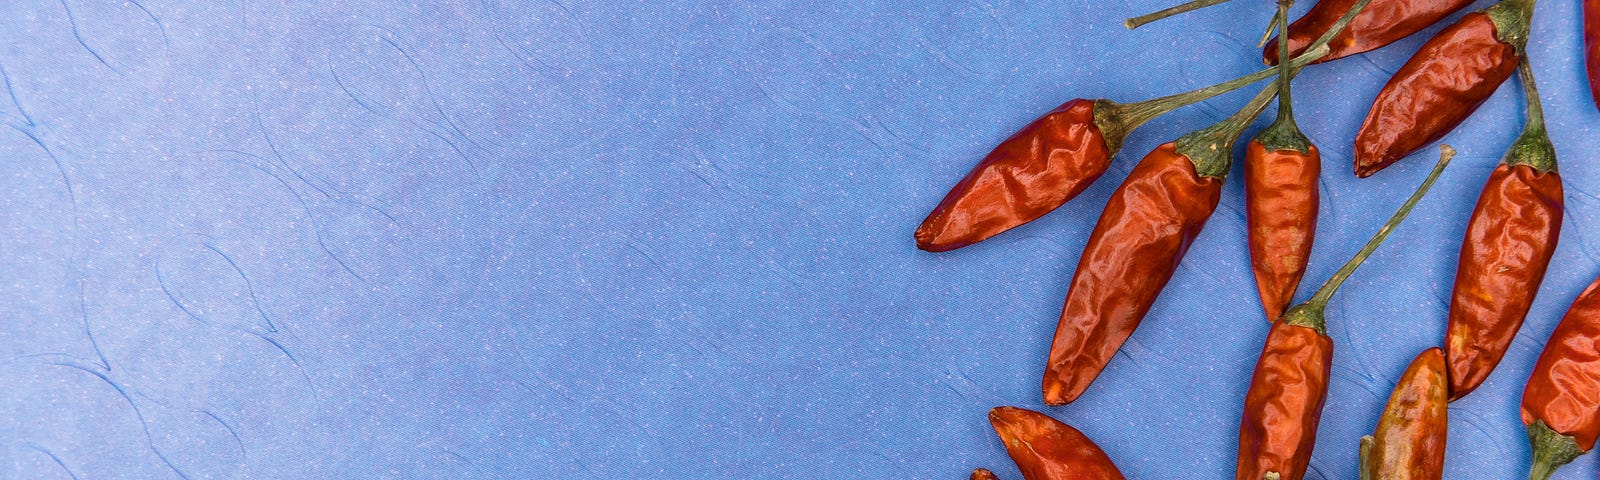 Selection of dried red chile peppers against a blue background.